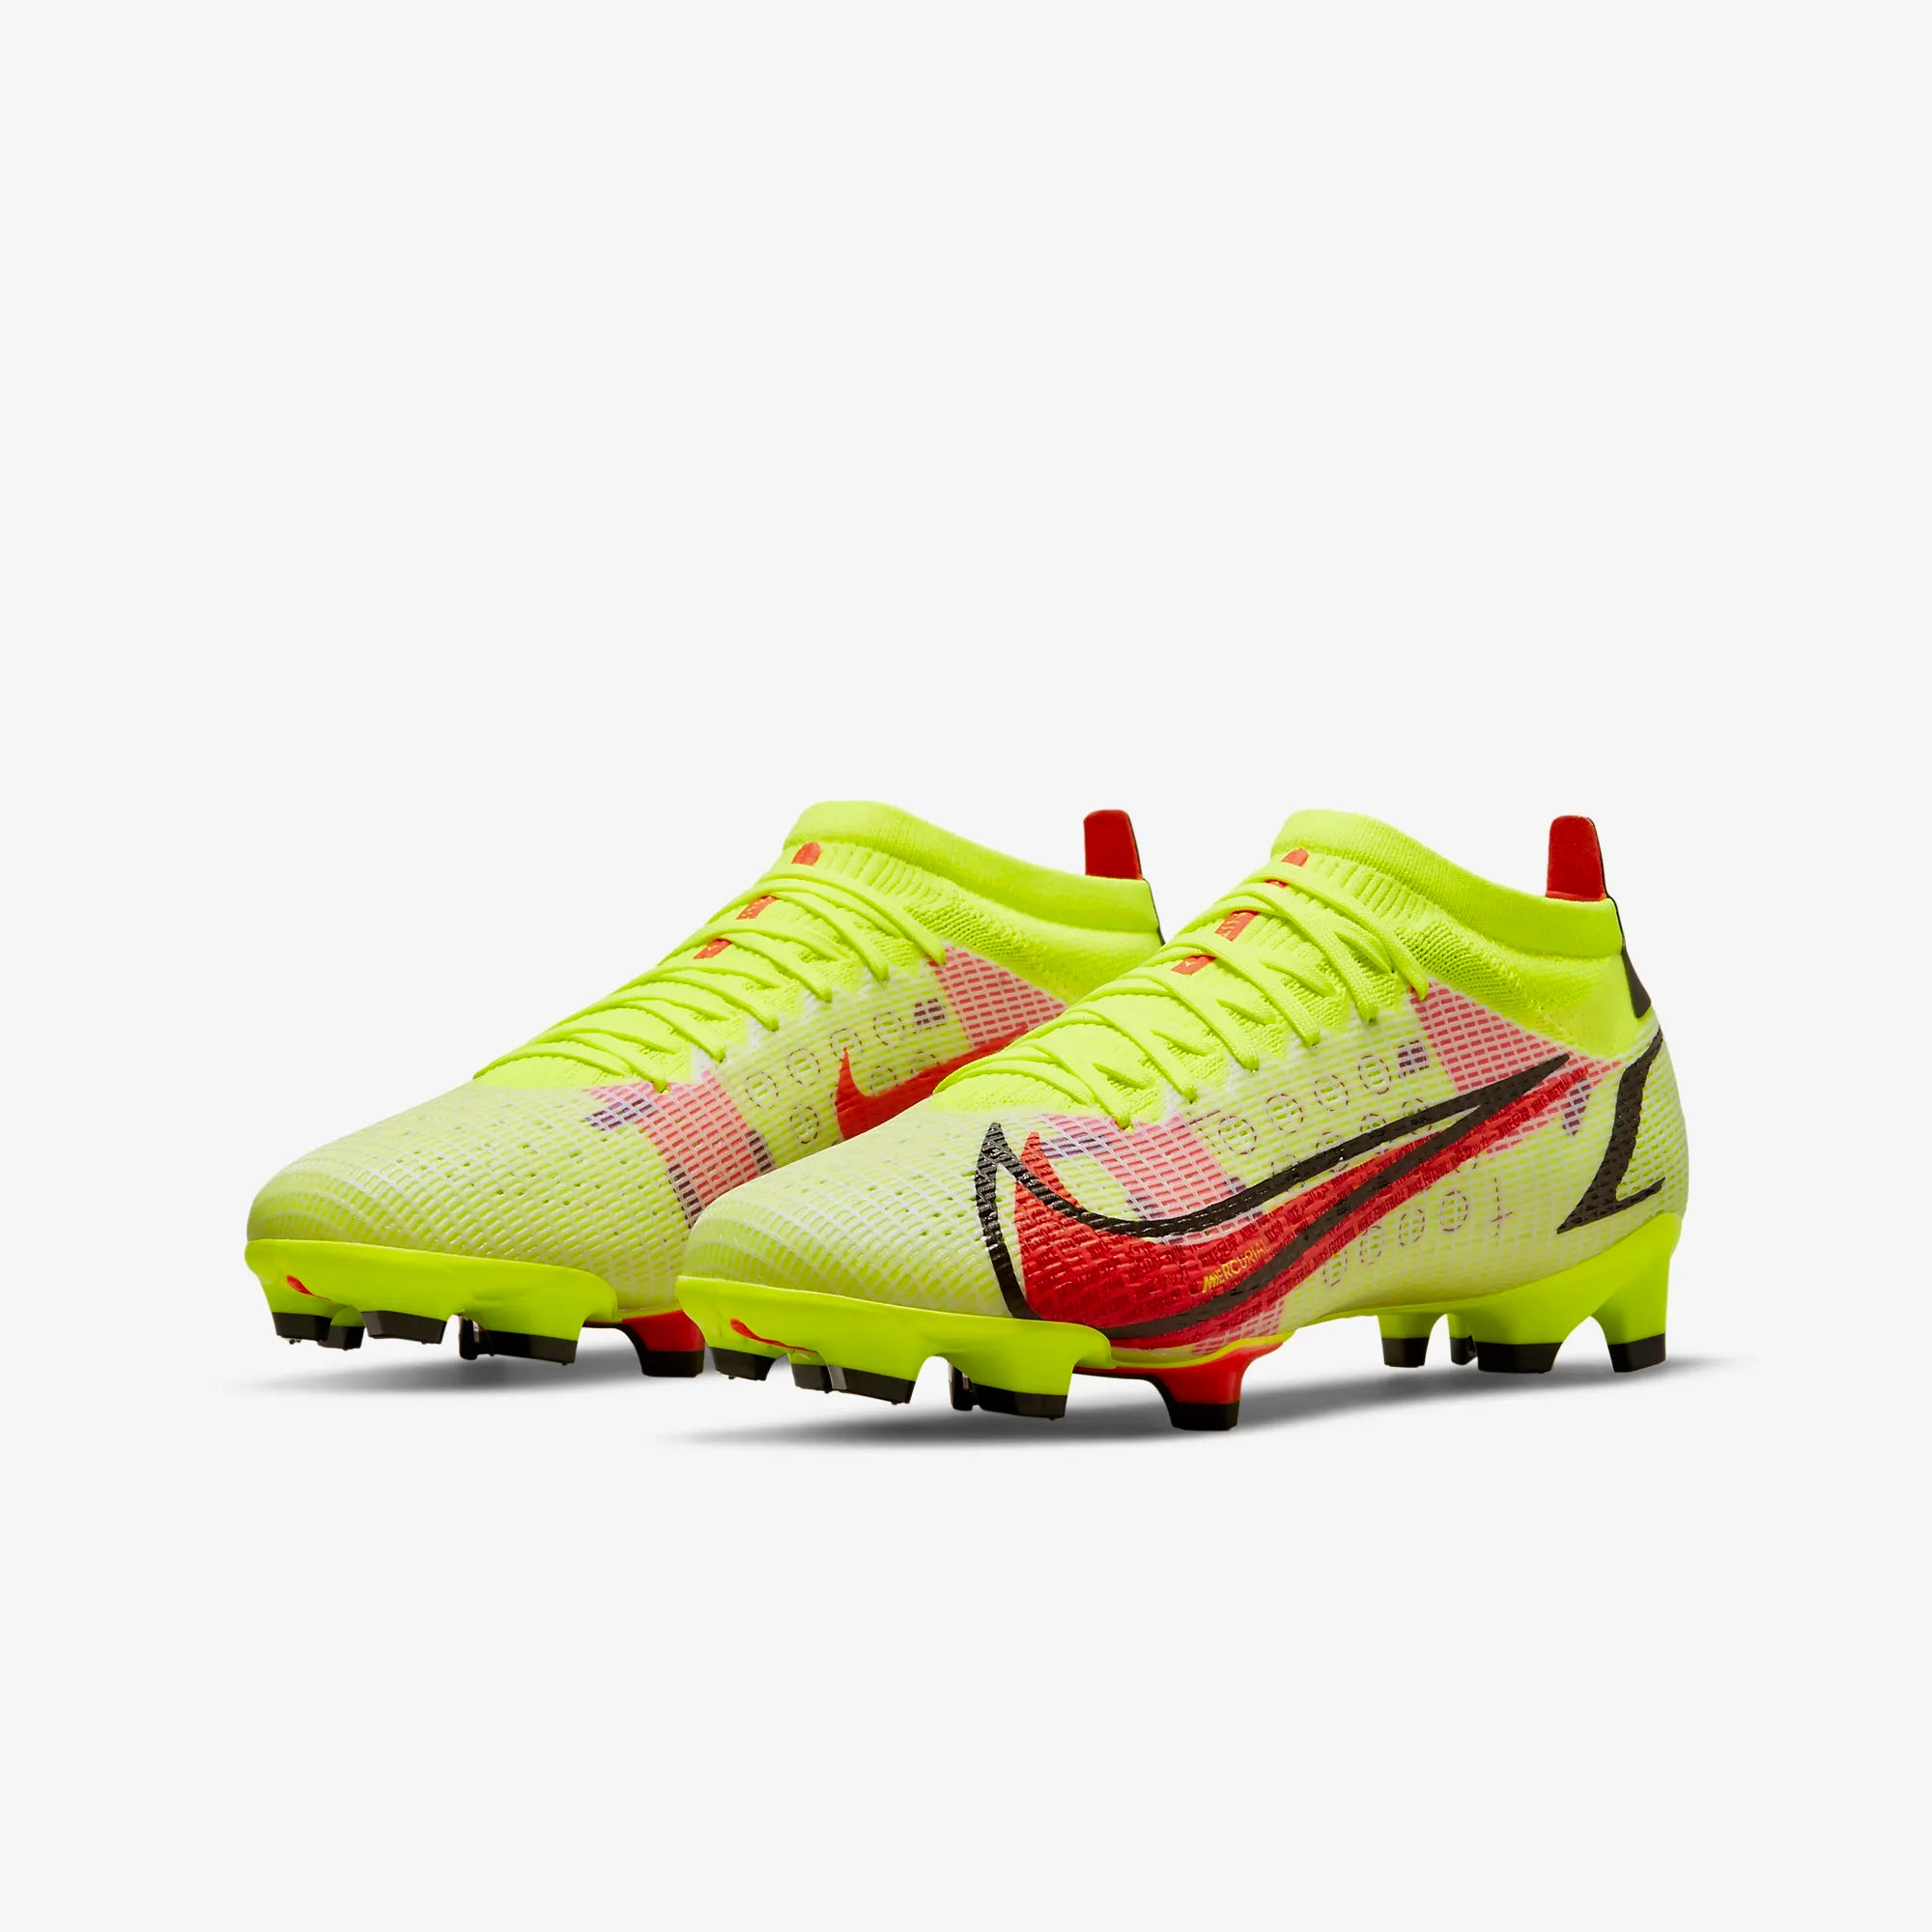 Nike Mercurial 14 Pro FG Firm-Ground Soccer Cleat